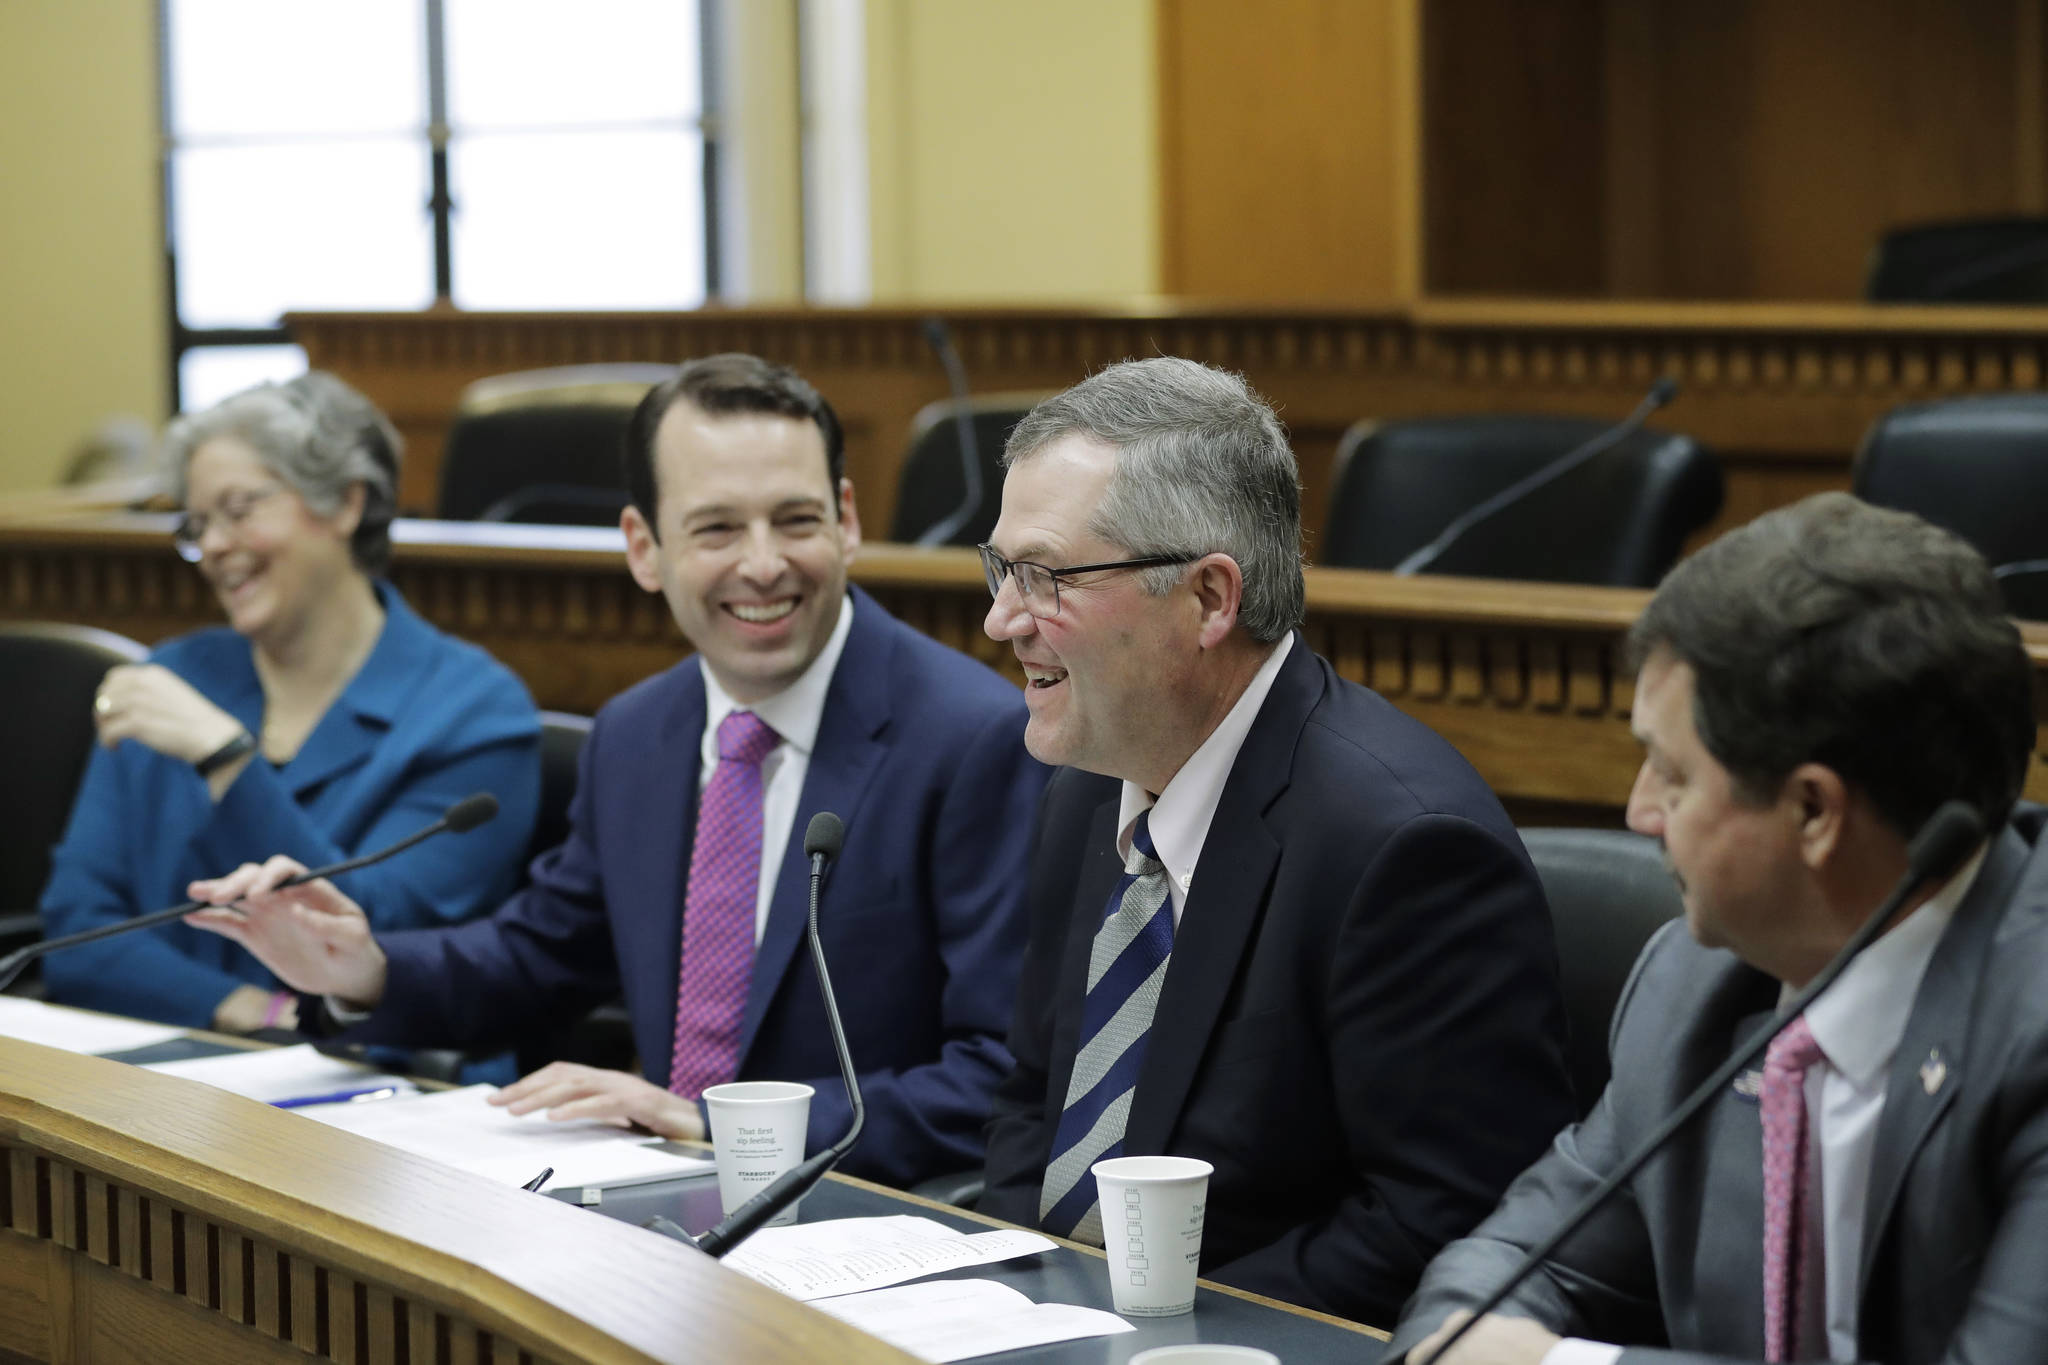 From left, House Speaker Designate Laurie Jinkins, D-Tacoma, Senate Majority Leader Andy Billig, D-Spokane, House Minority Leader J.T. Wilcox, R-Yelm, and Senate Minority Leader Mark Schoesler, R-Ritzville, take part in the AP Legislative Preview, Thursday, Jan. 9, 2020, at the Capitol in Olympia, Wash. (AP Photo/Ted S. Warren)